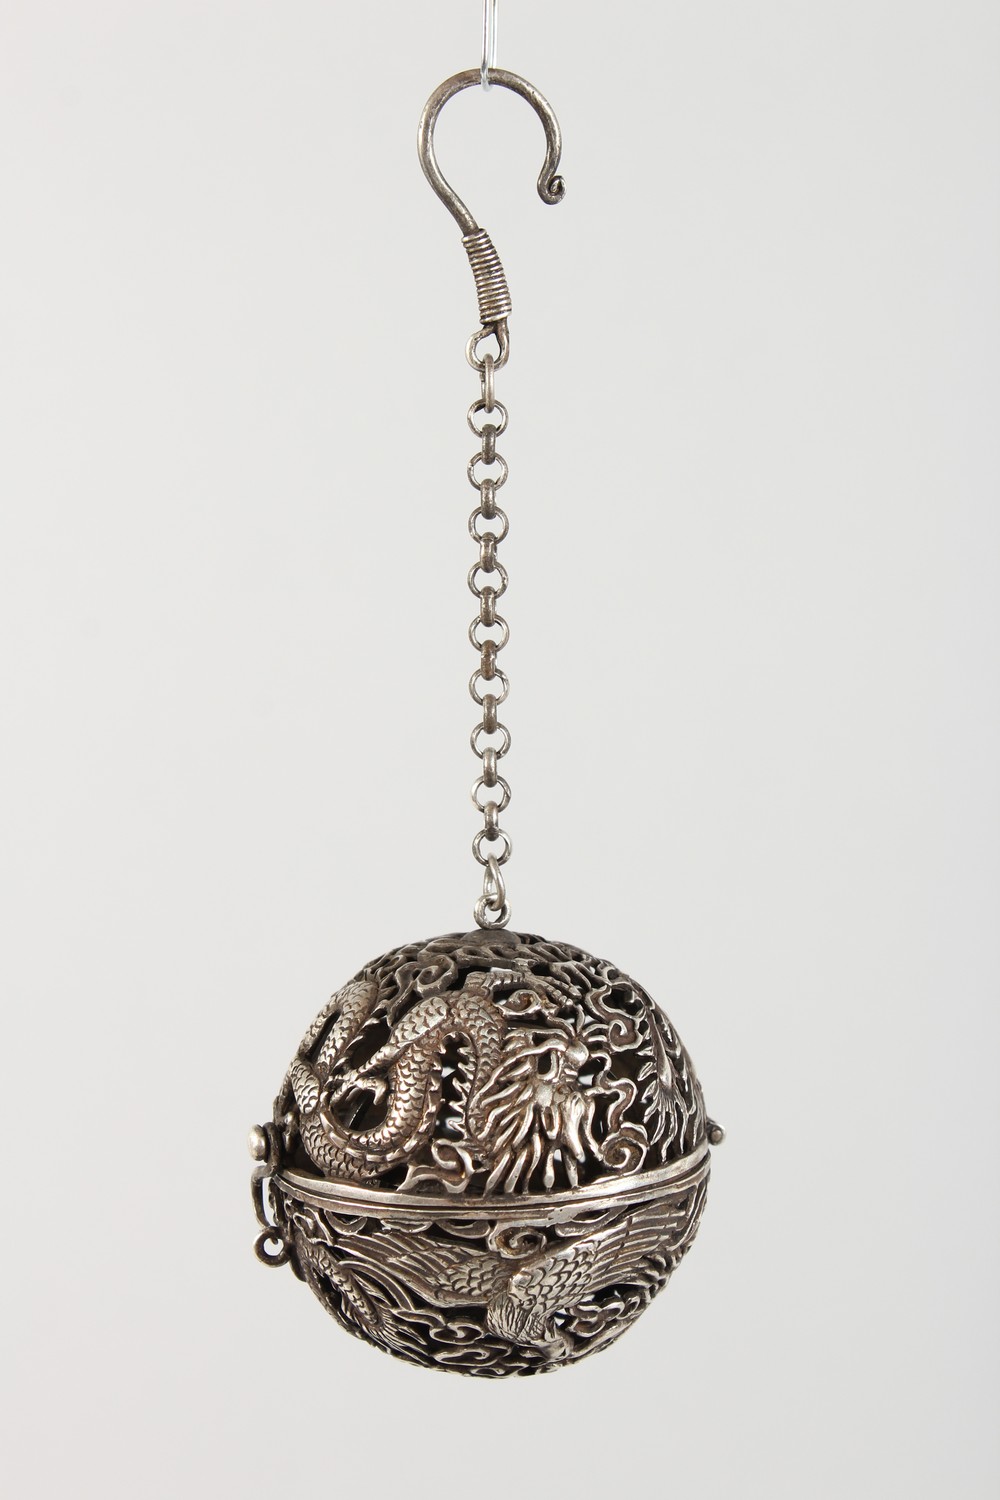 A CHINESE WHITE METAL PIERCED BALL CENSER. 2ins diameter. - Image 2 of 3